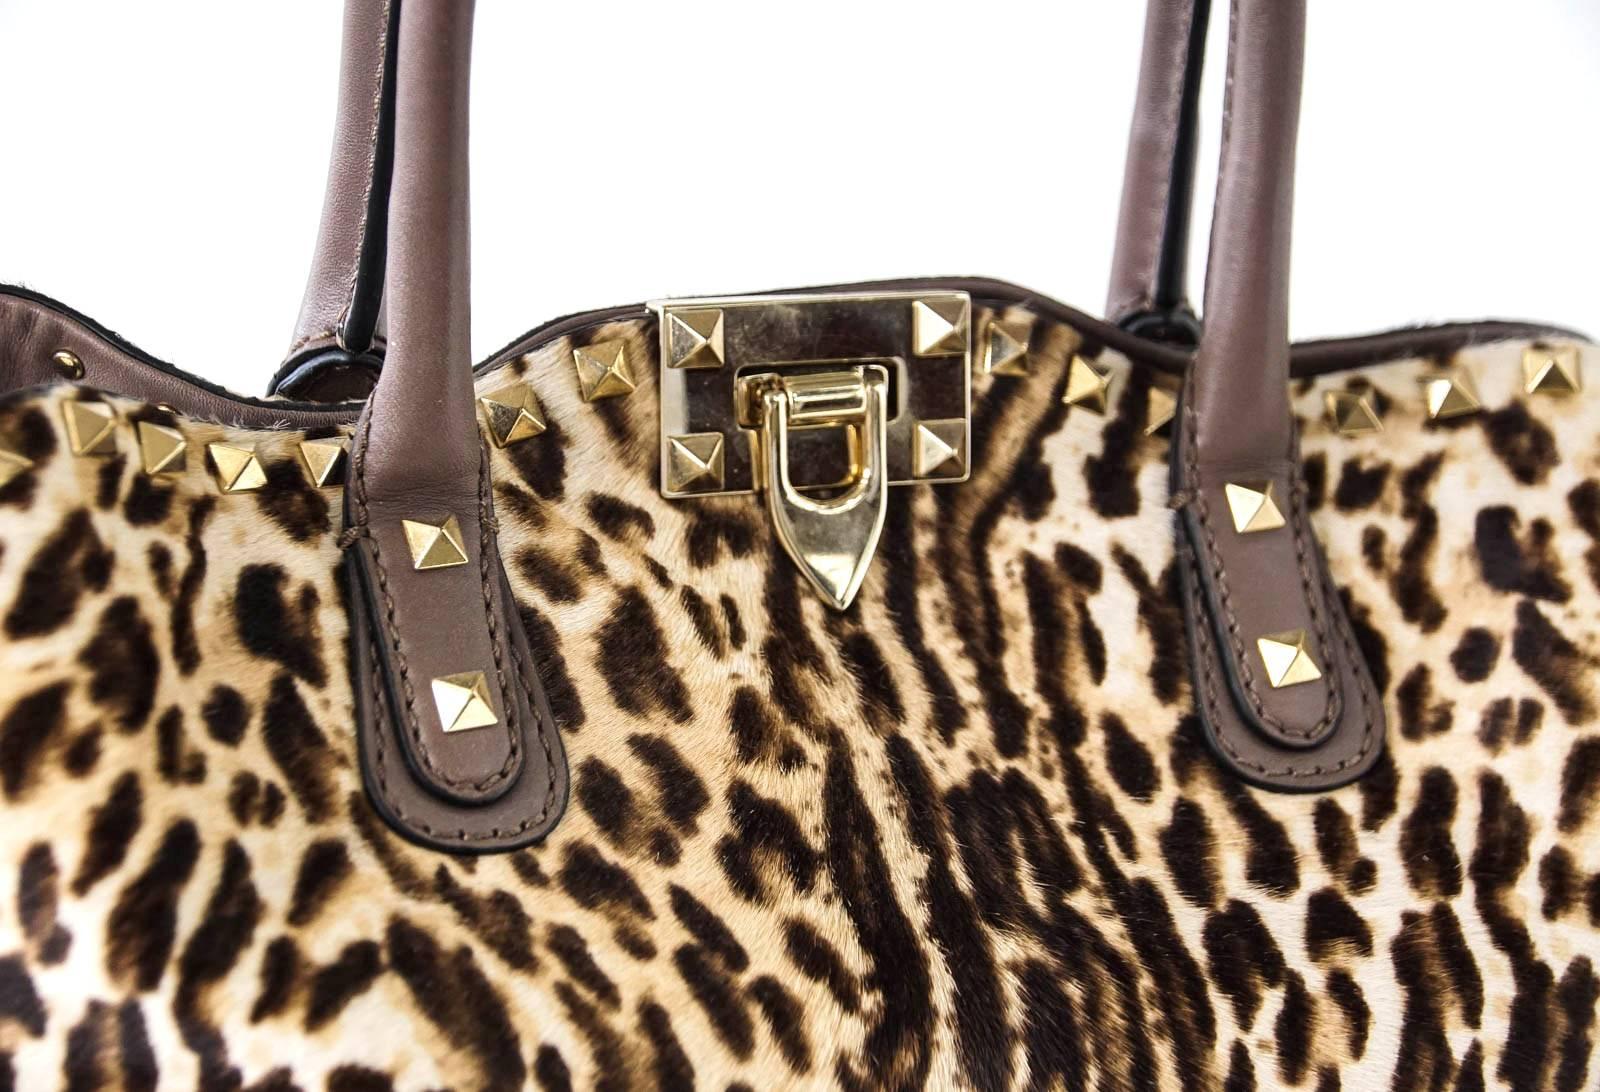 Guaranteed authentic VALENTINO GARAVANI Calf Hair Cavallino Animal Rockstud Dome Satchel tote bag.
Calf hair in animal print. 
Light brass signature studs and closure clasp.
Detachable leather shoulder strap with rockstuds. 
Leather handles and base